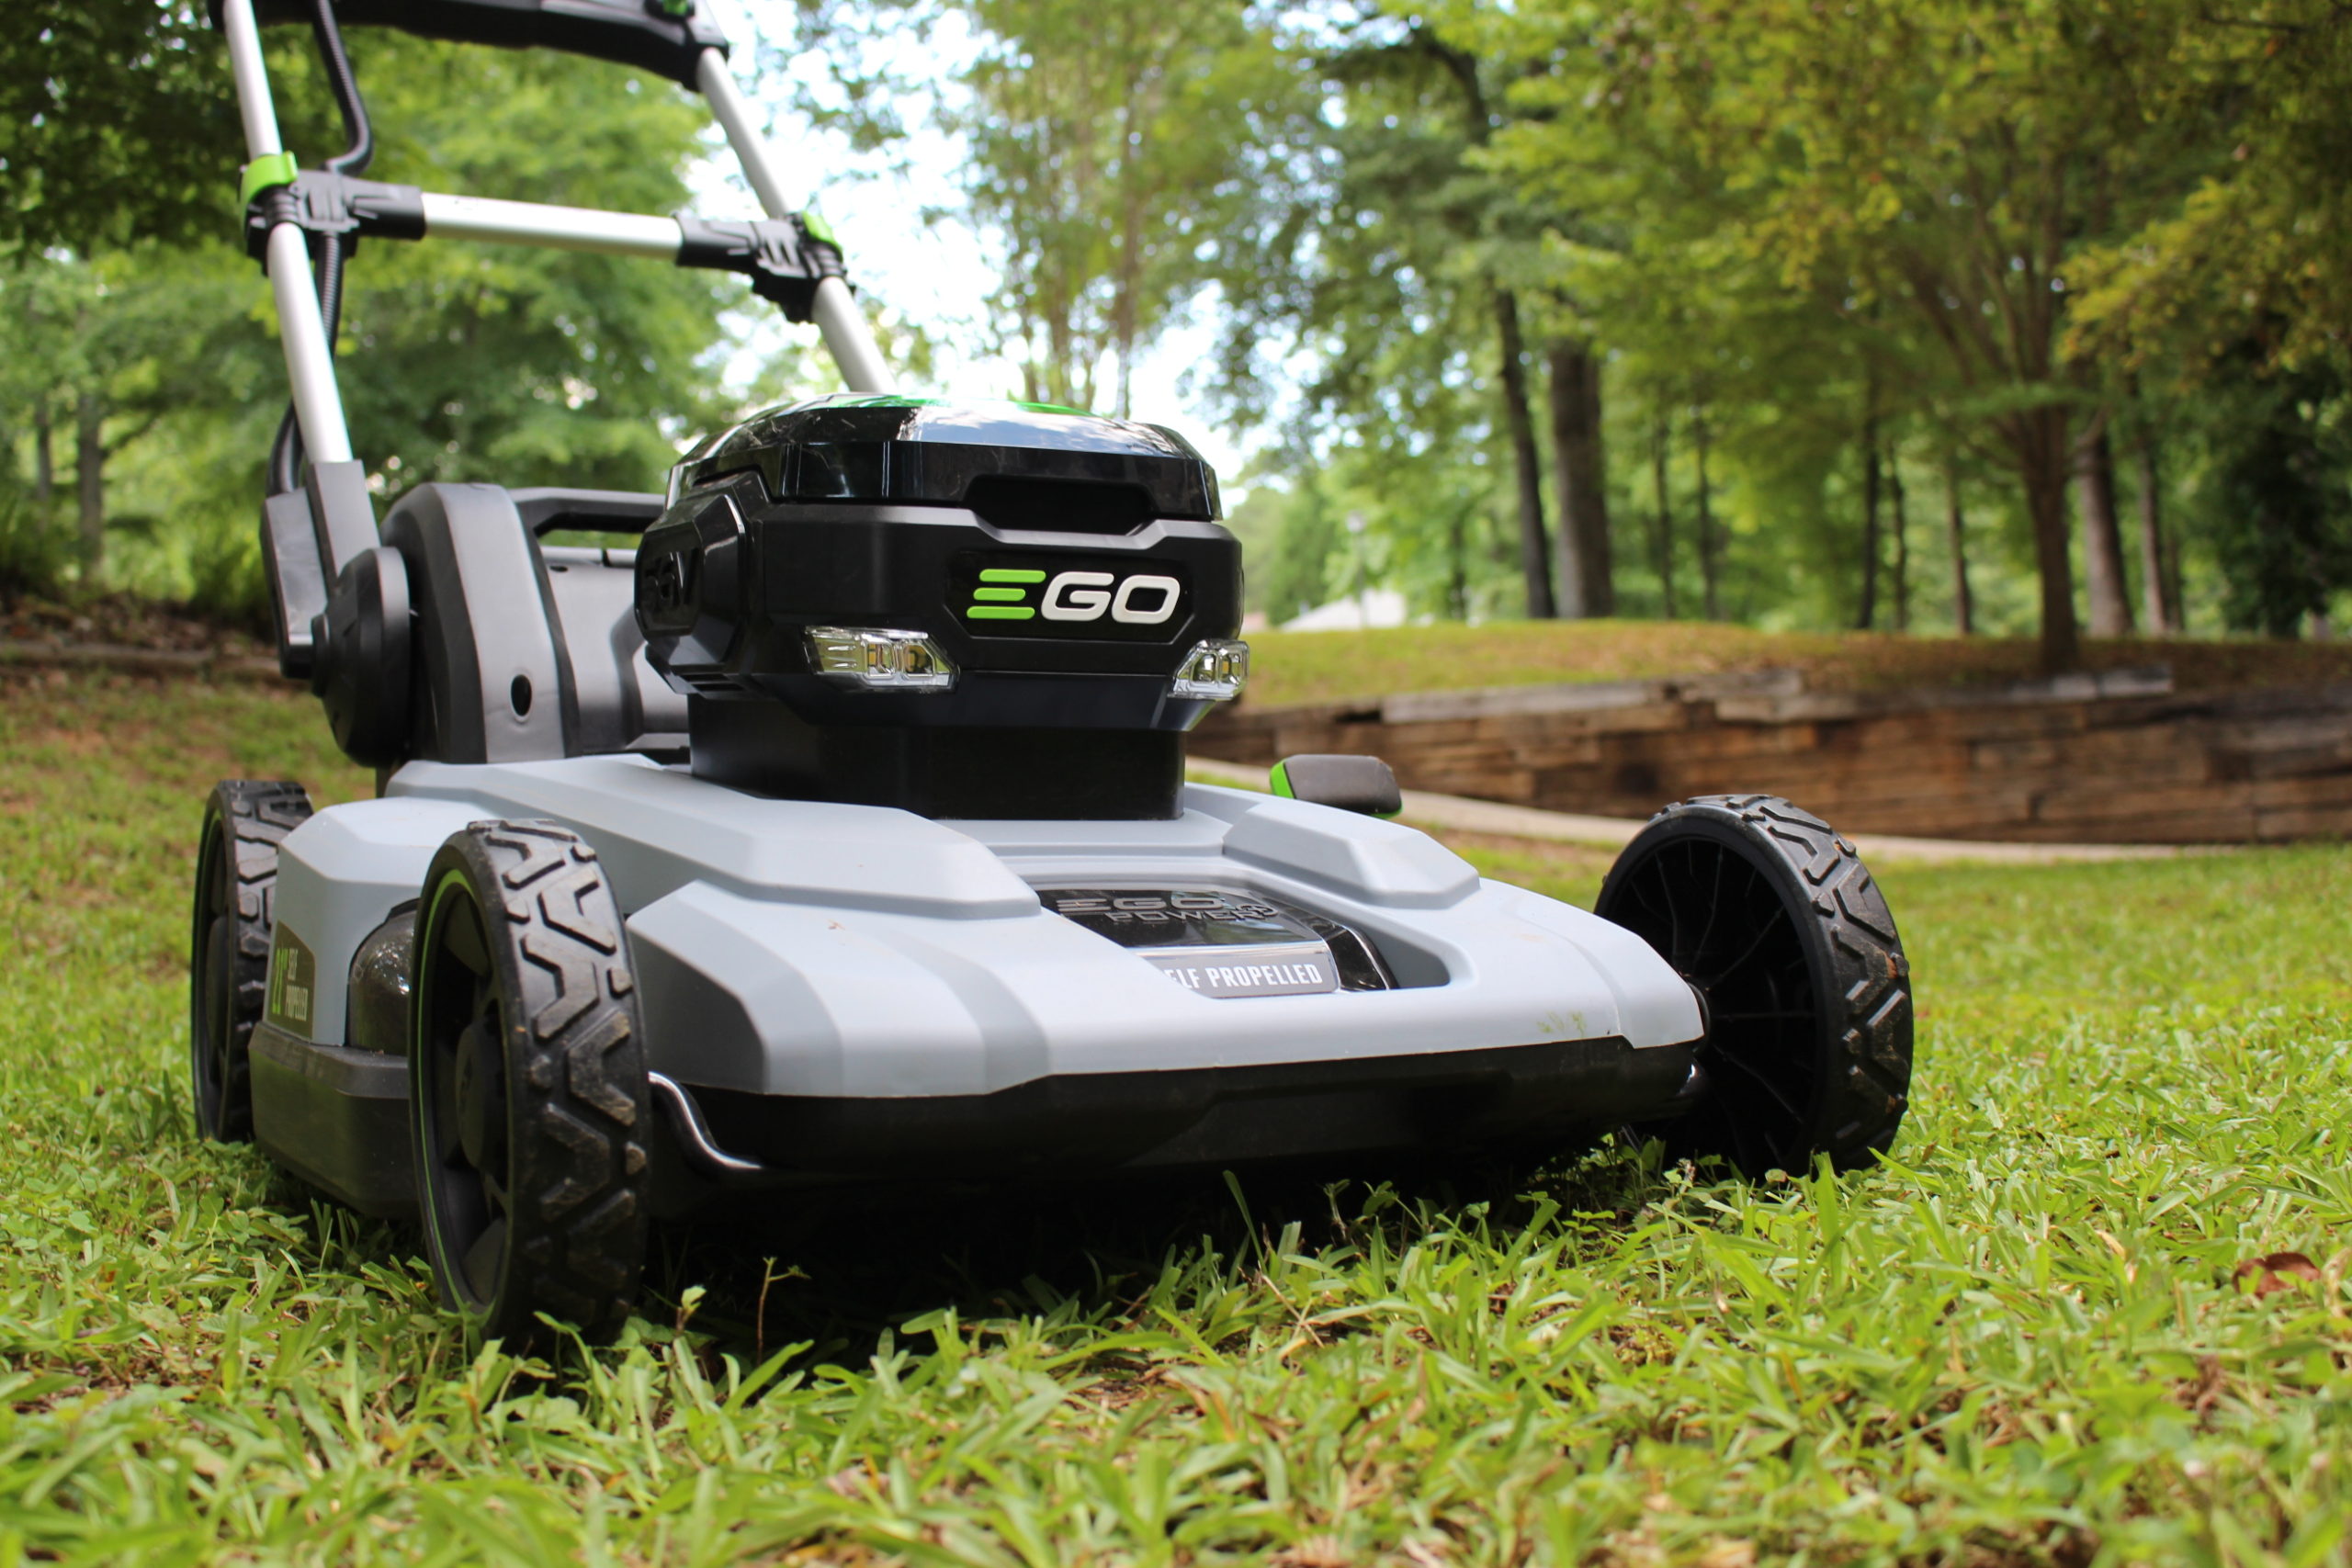 Ego electric lawn mower review